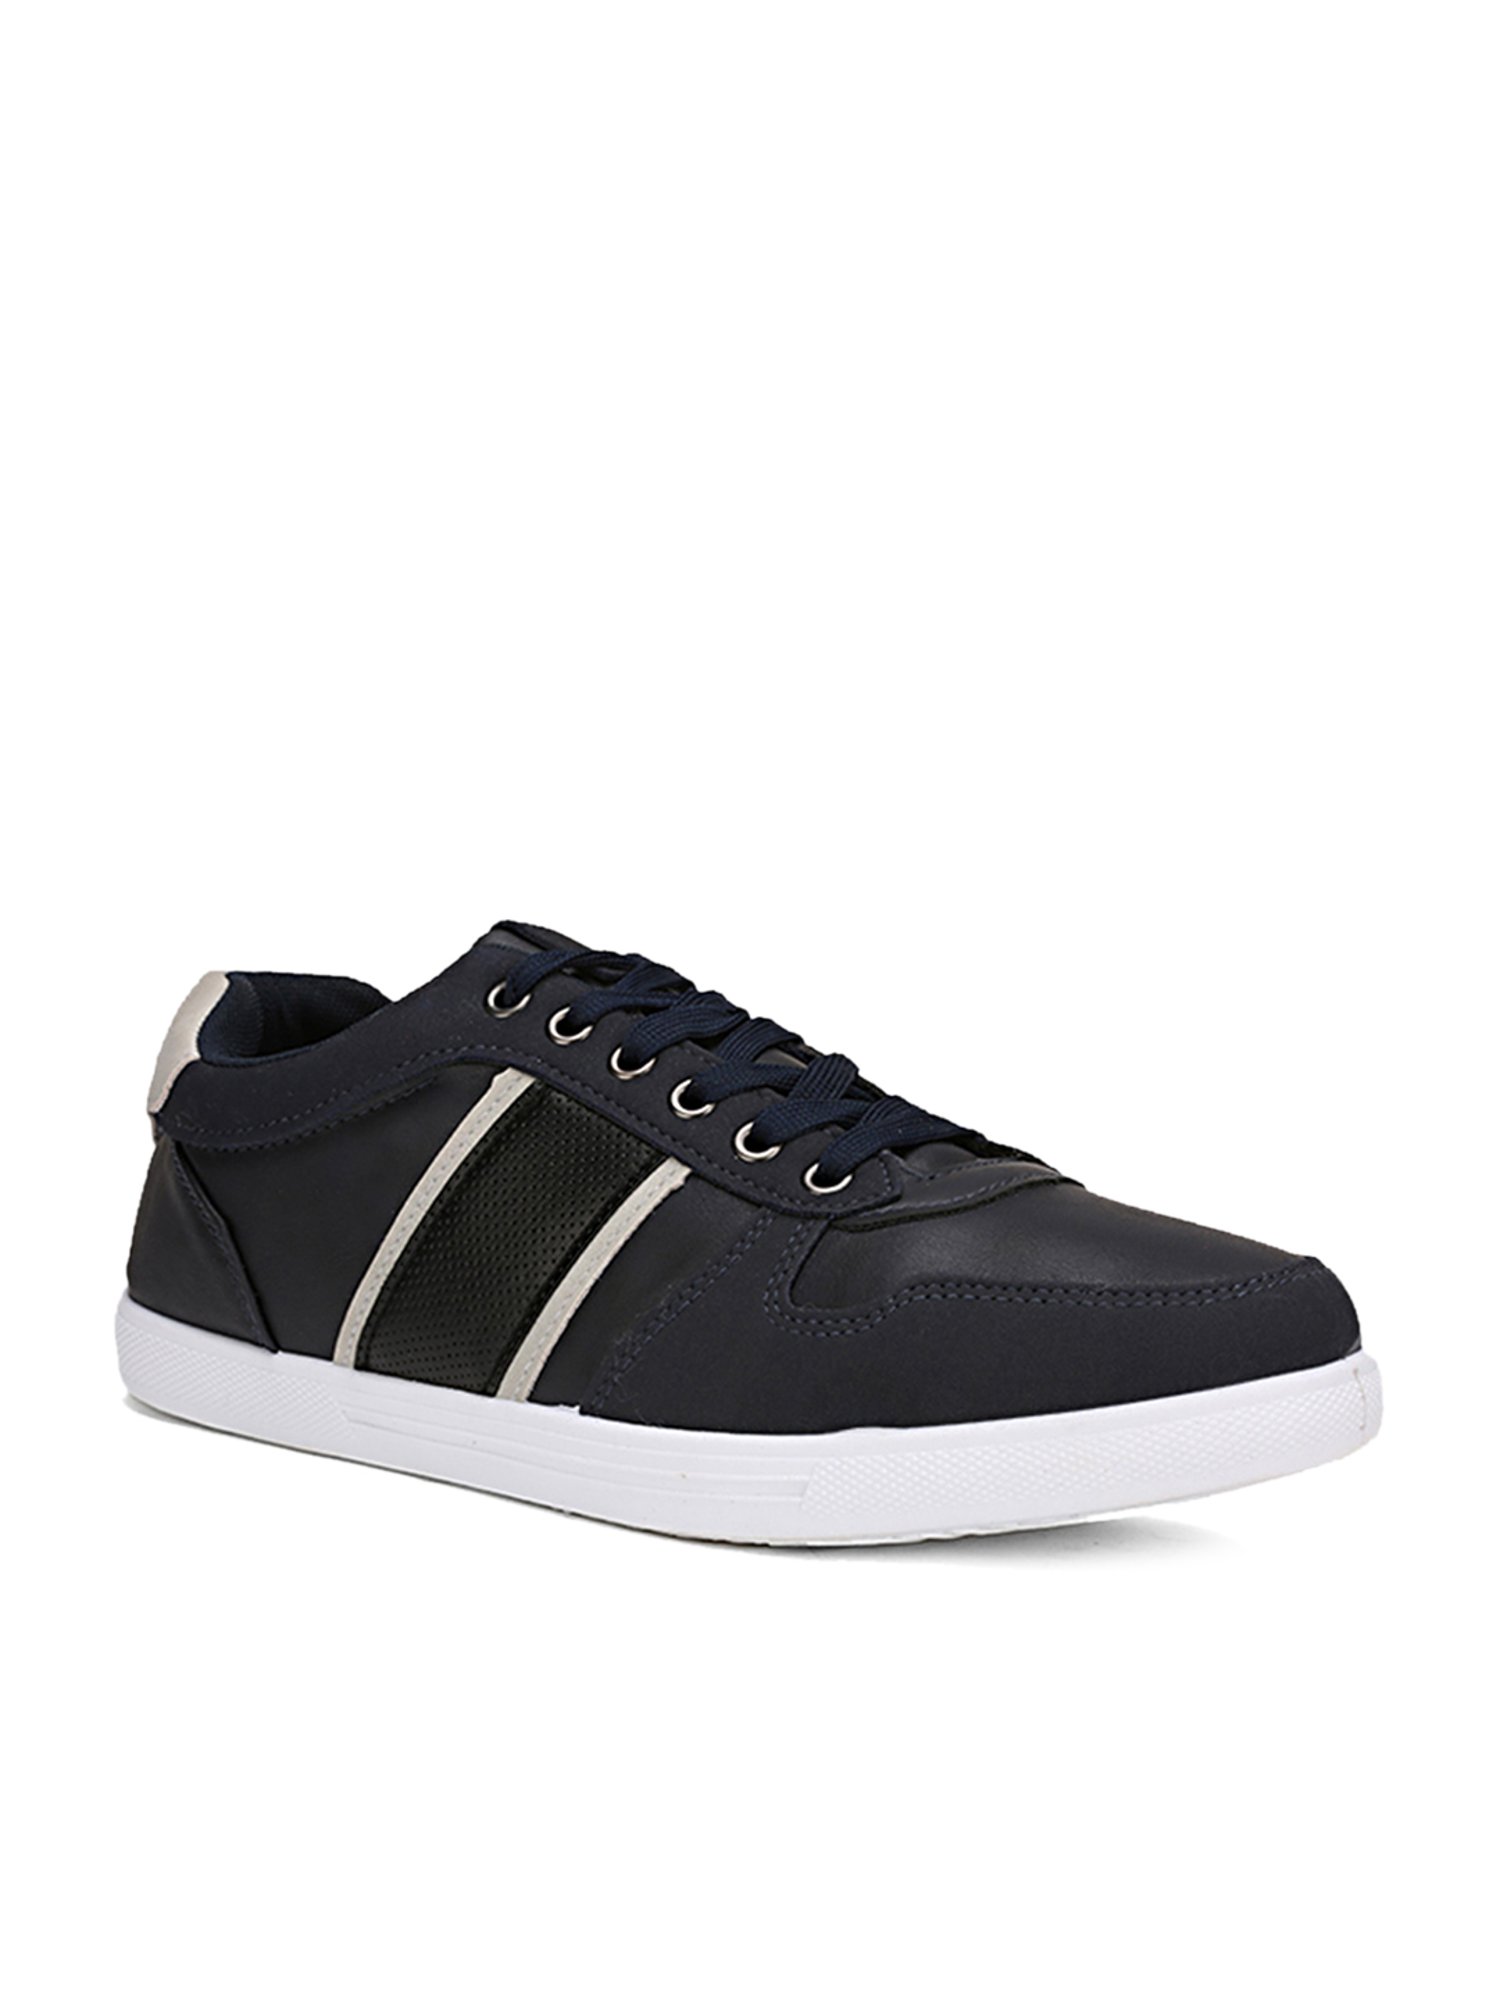 The Roadster Lifestyle Co. Men Black & Blue Colourblocked Lightweight  Sneakers - Price History